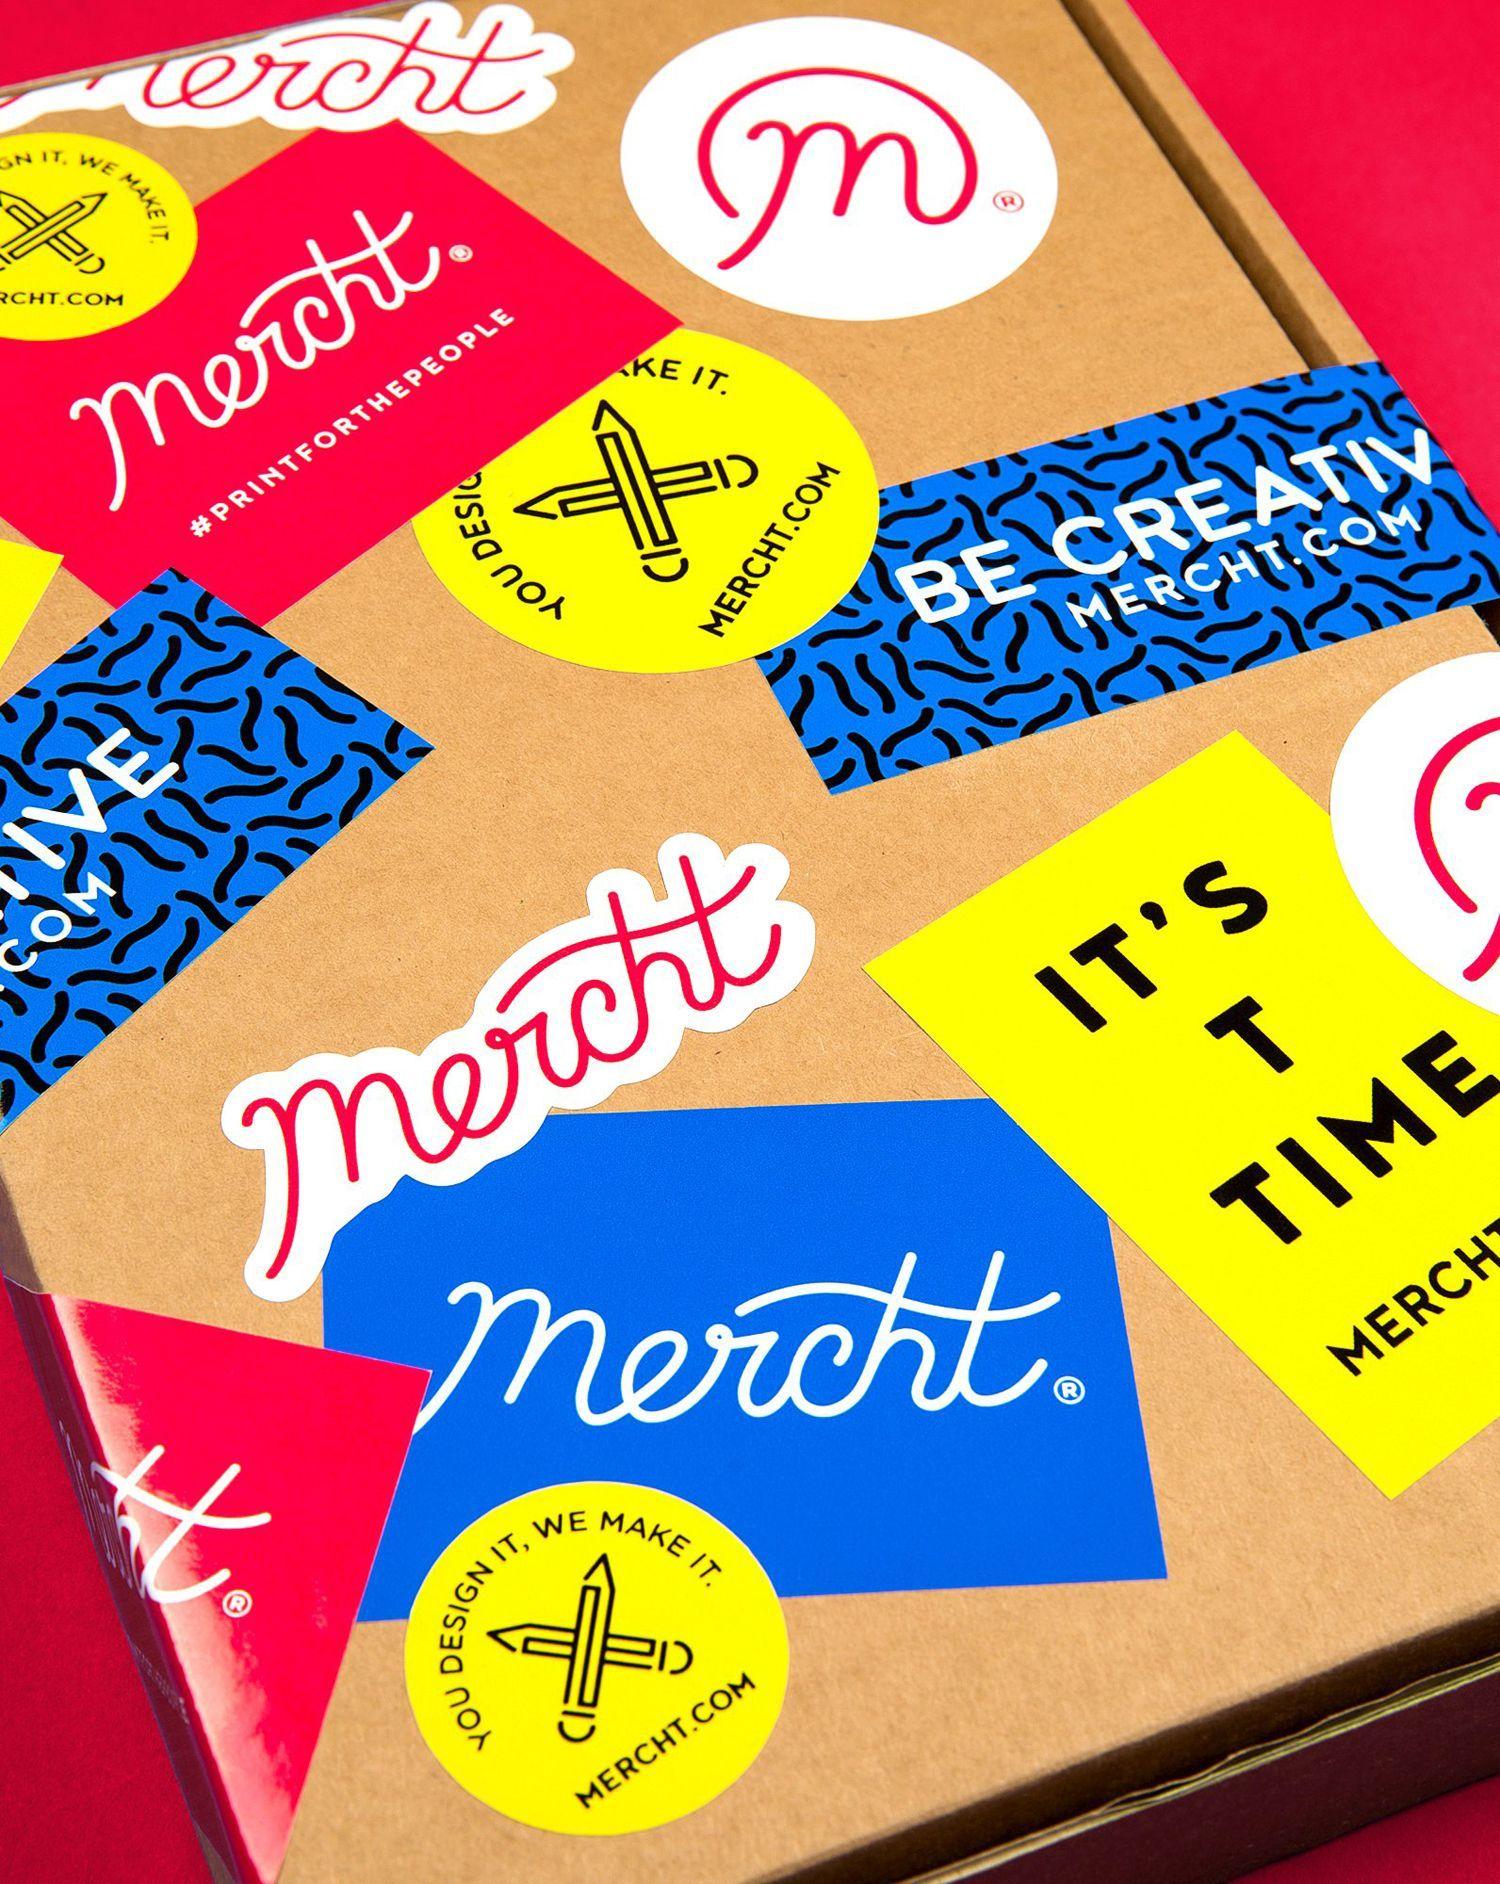 Robot with Yellow Food Logo - New Logo & Brand Identity for Mercht